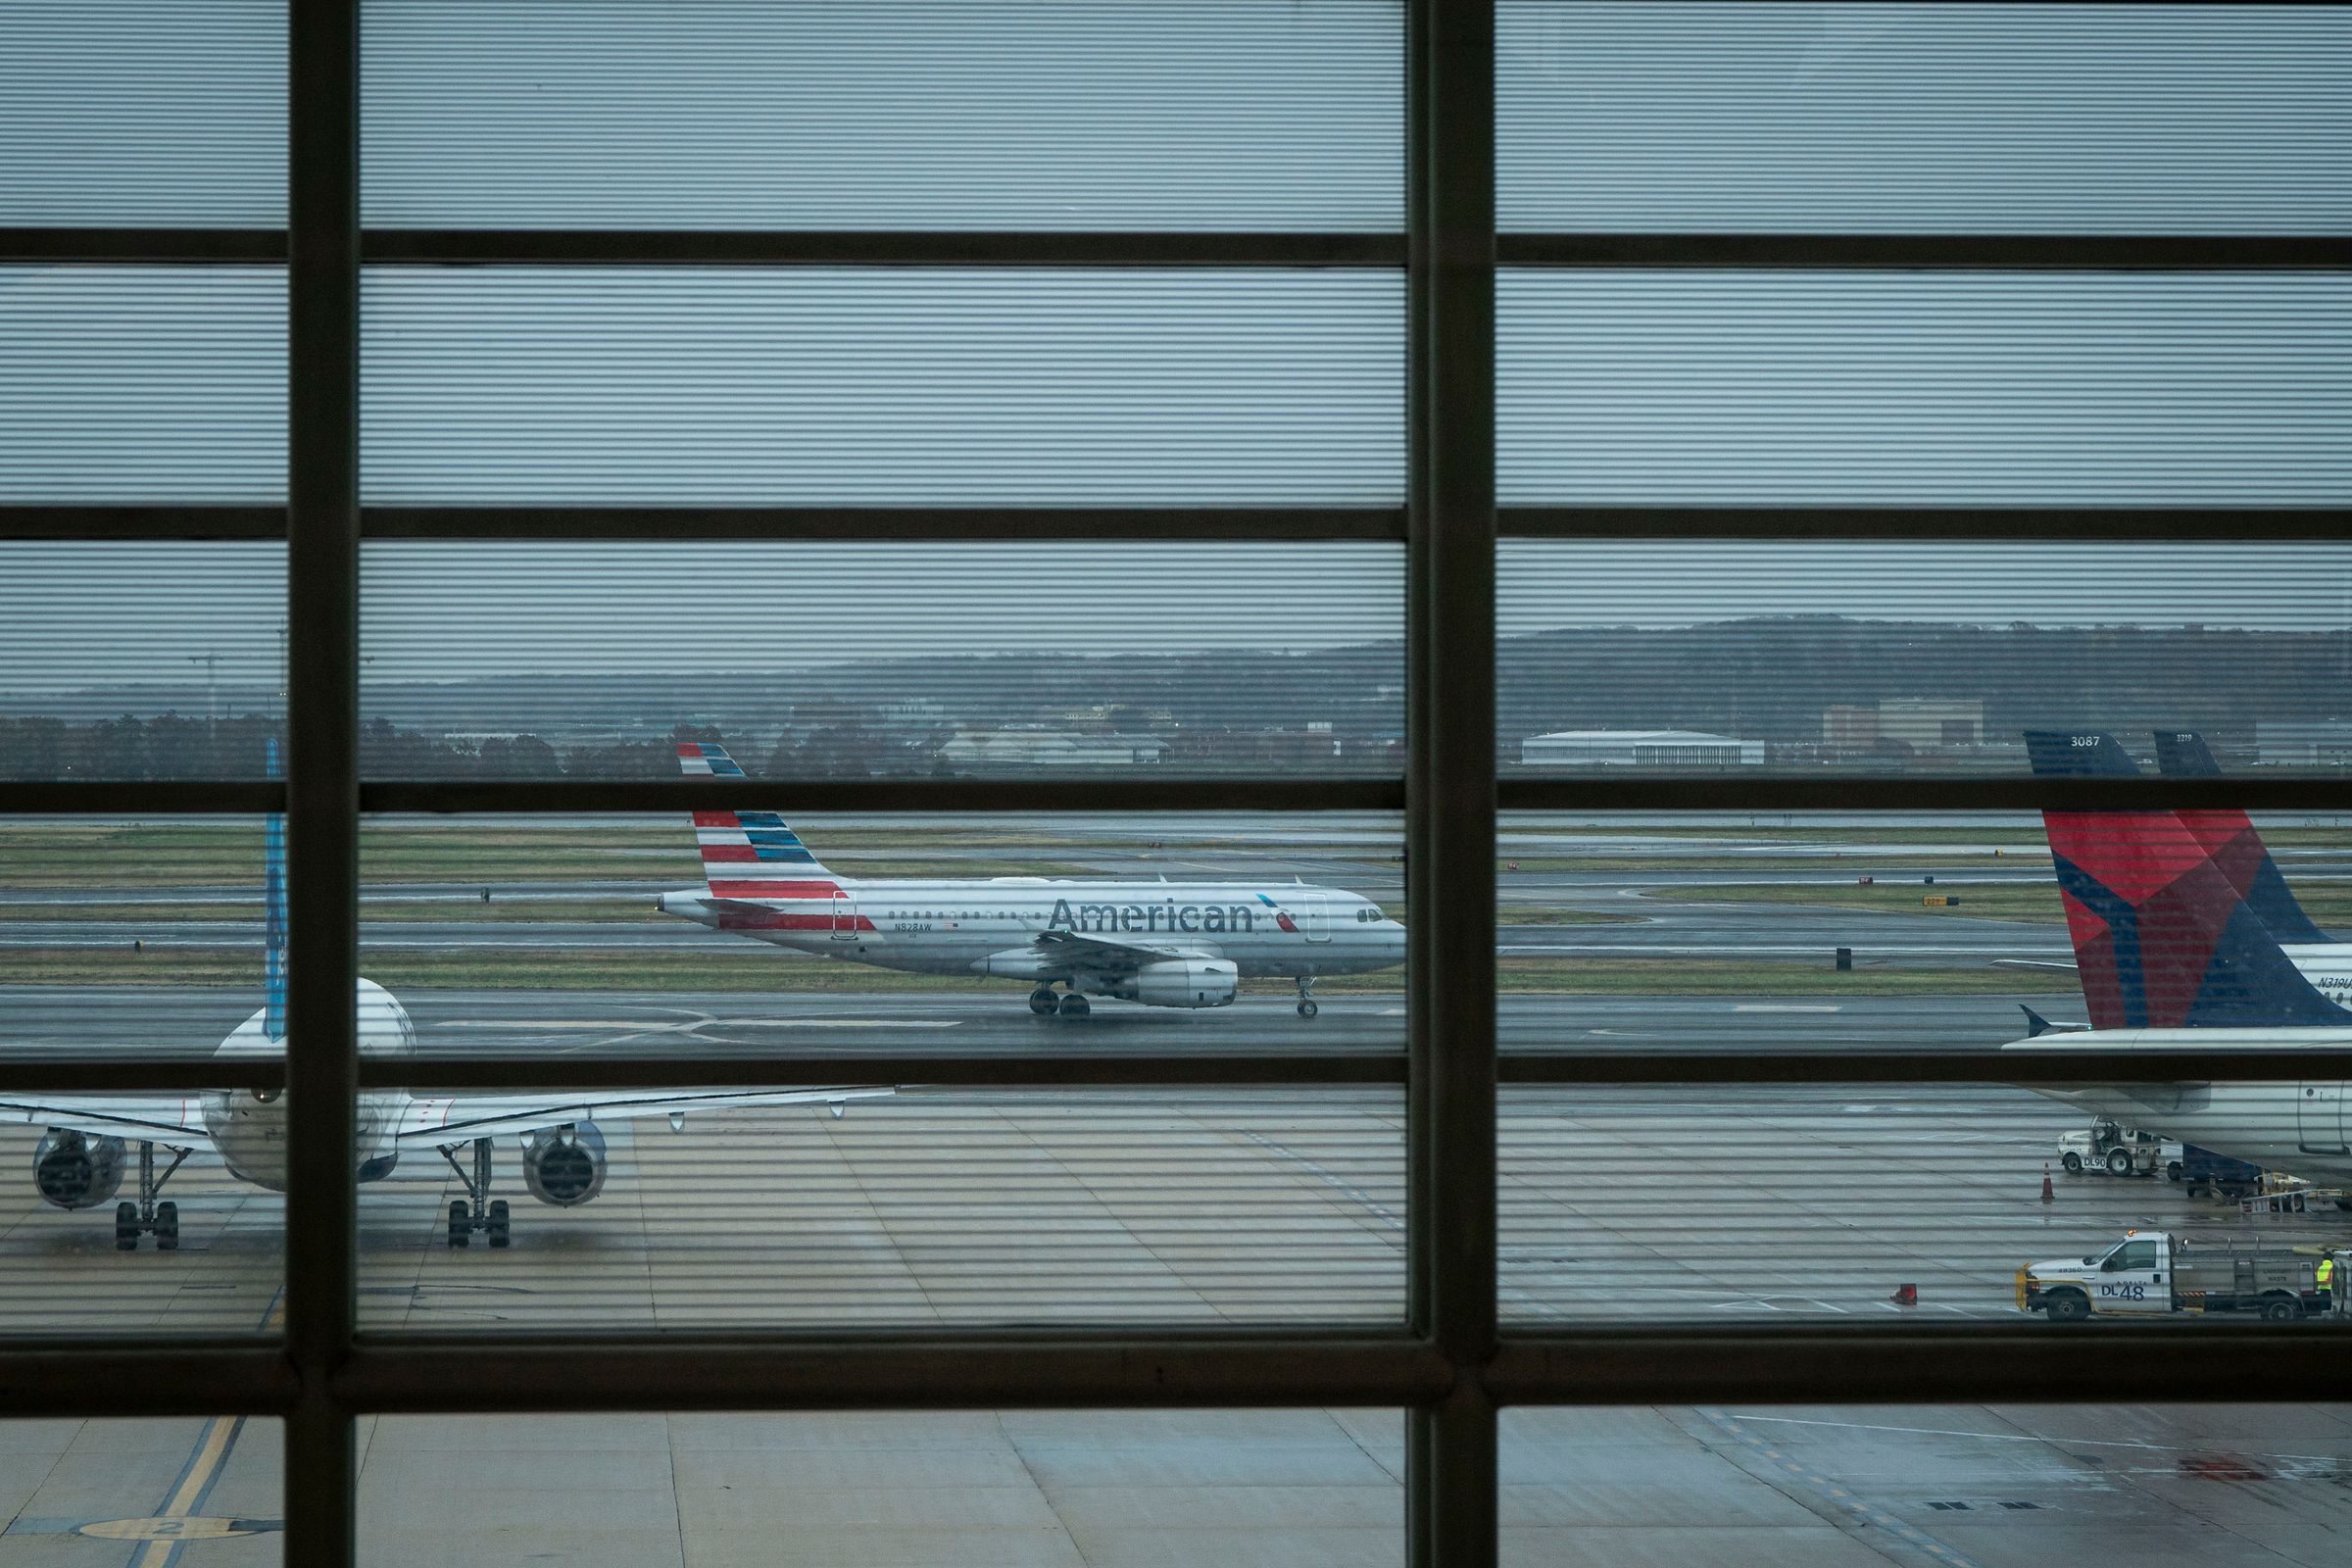 Several planes sitting on a runway seen through an airport window. A plane with the American Airlines logo can be seen in the center of the photo between window panes.